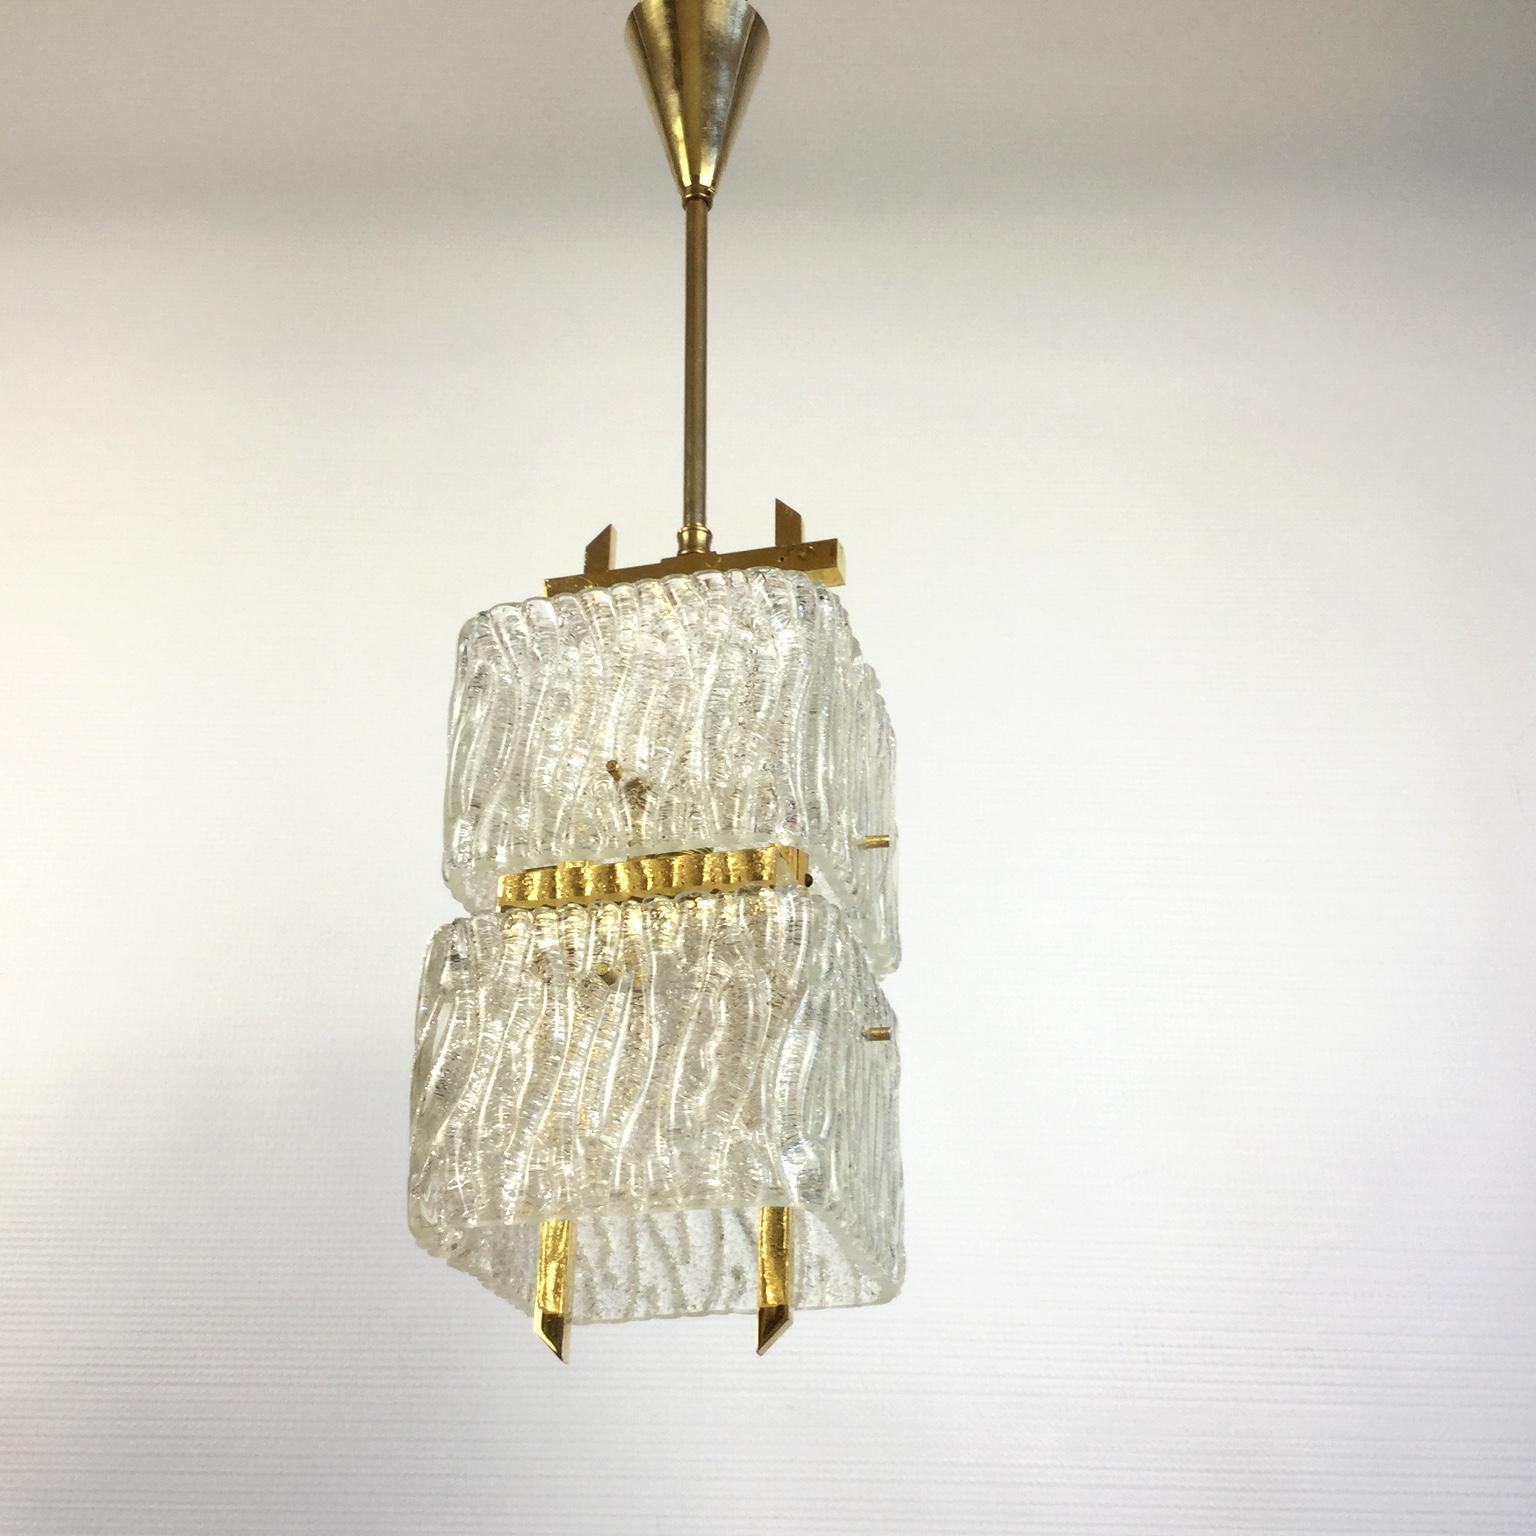 Chandelier with 2 thick glass shades in the shape of a square wavy ribbon fixed on a brass frame
Completely rewired.